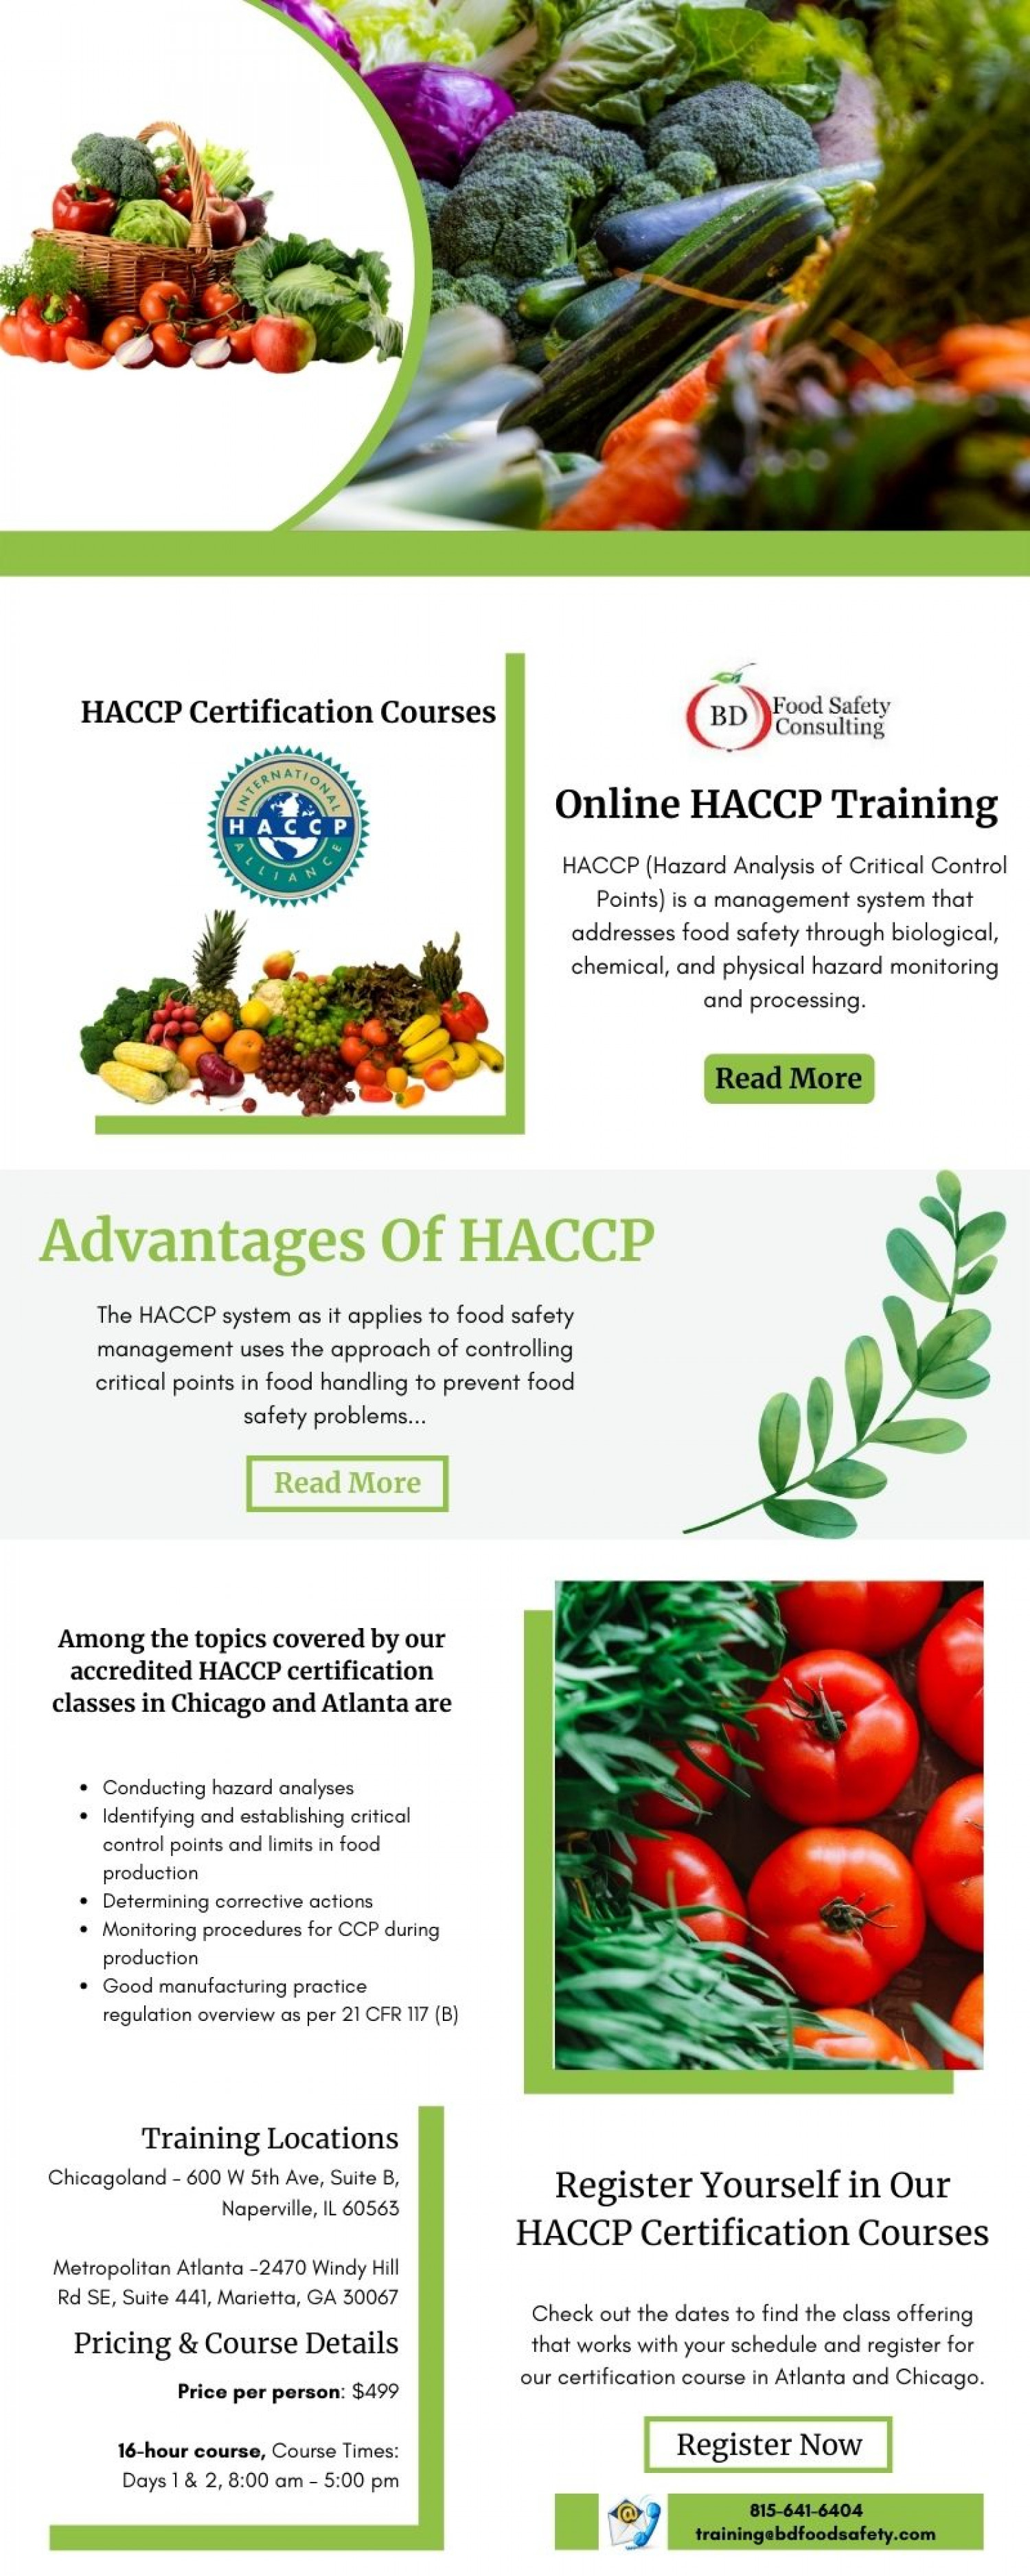 HACCP Certification Courses Infographic